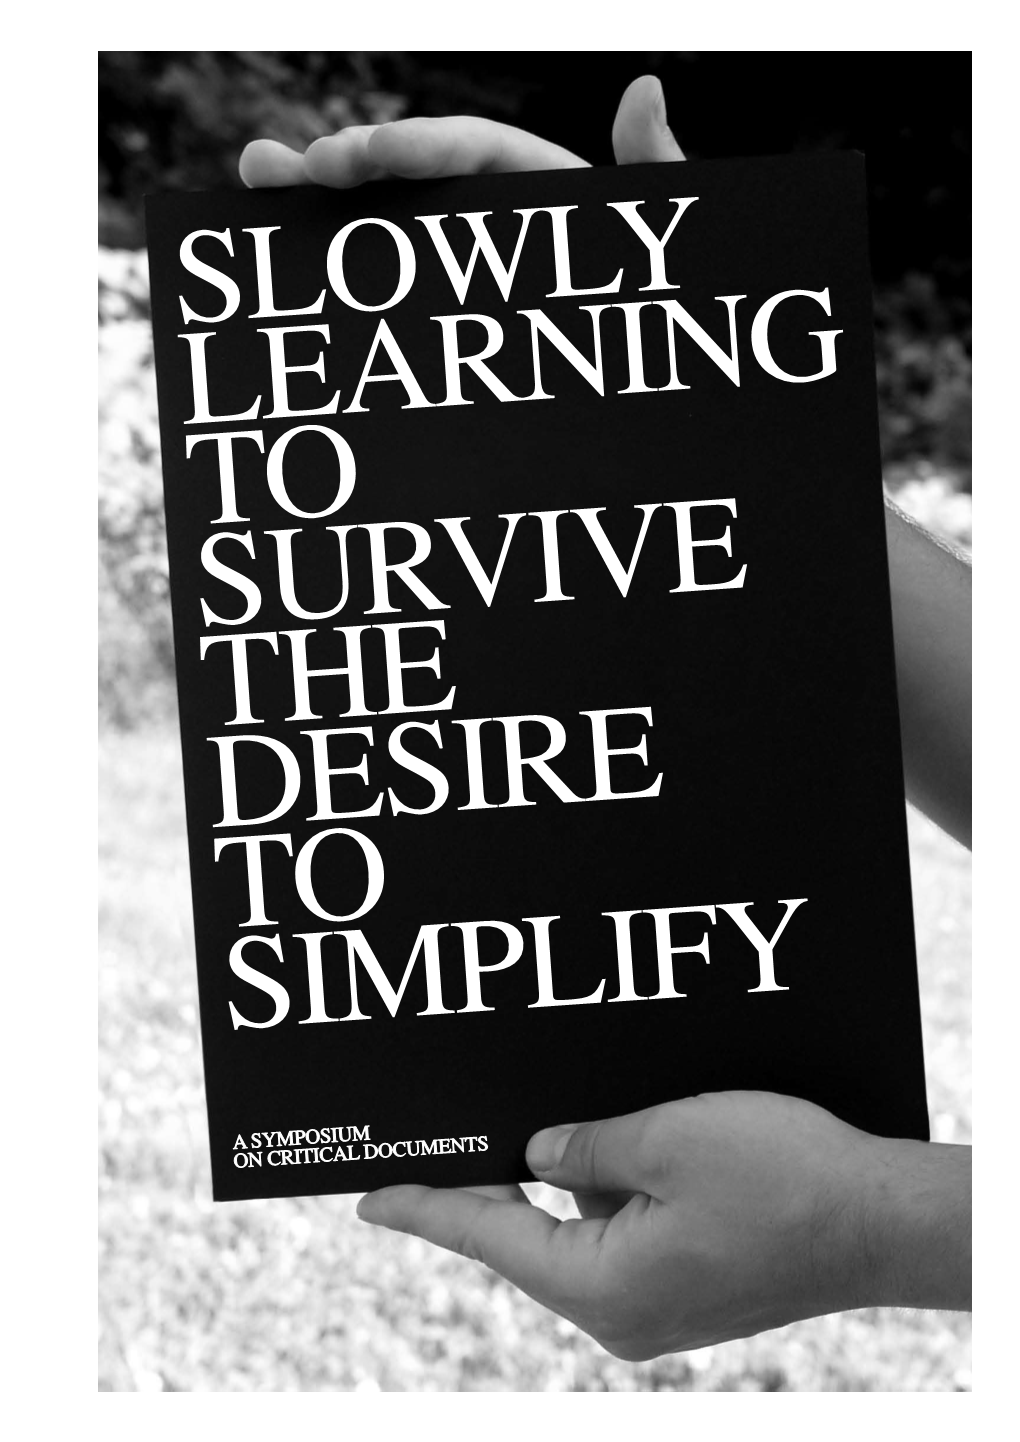 Download No 93: Slowly Learning